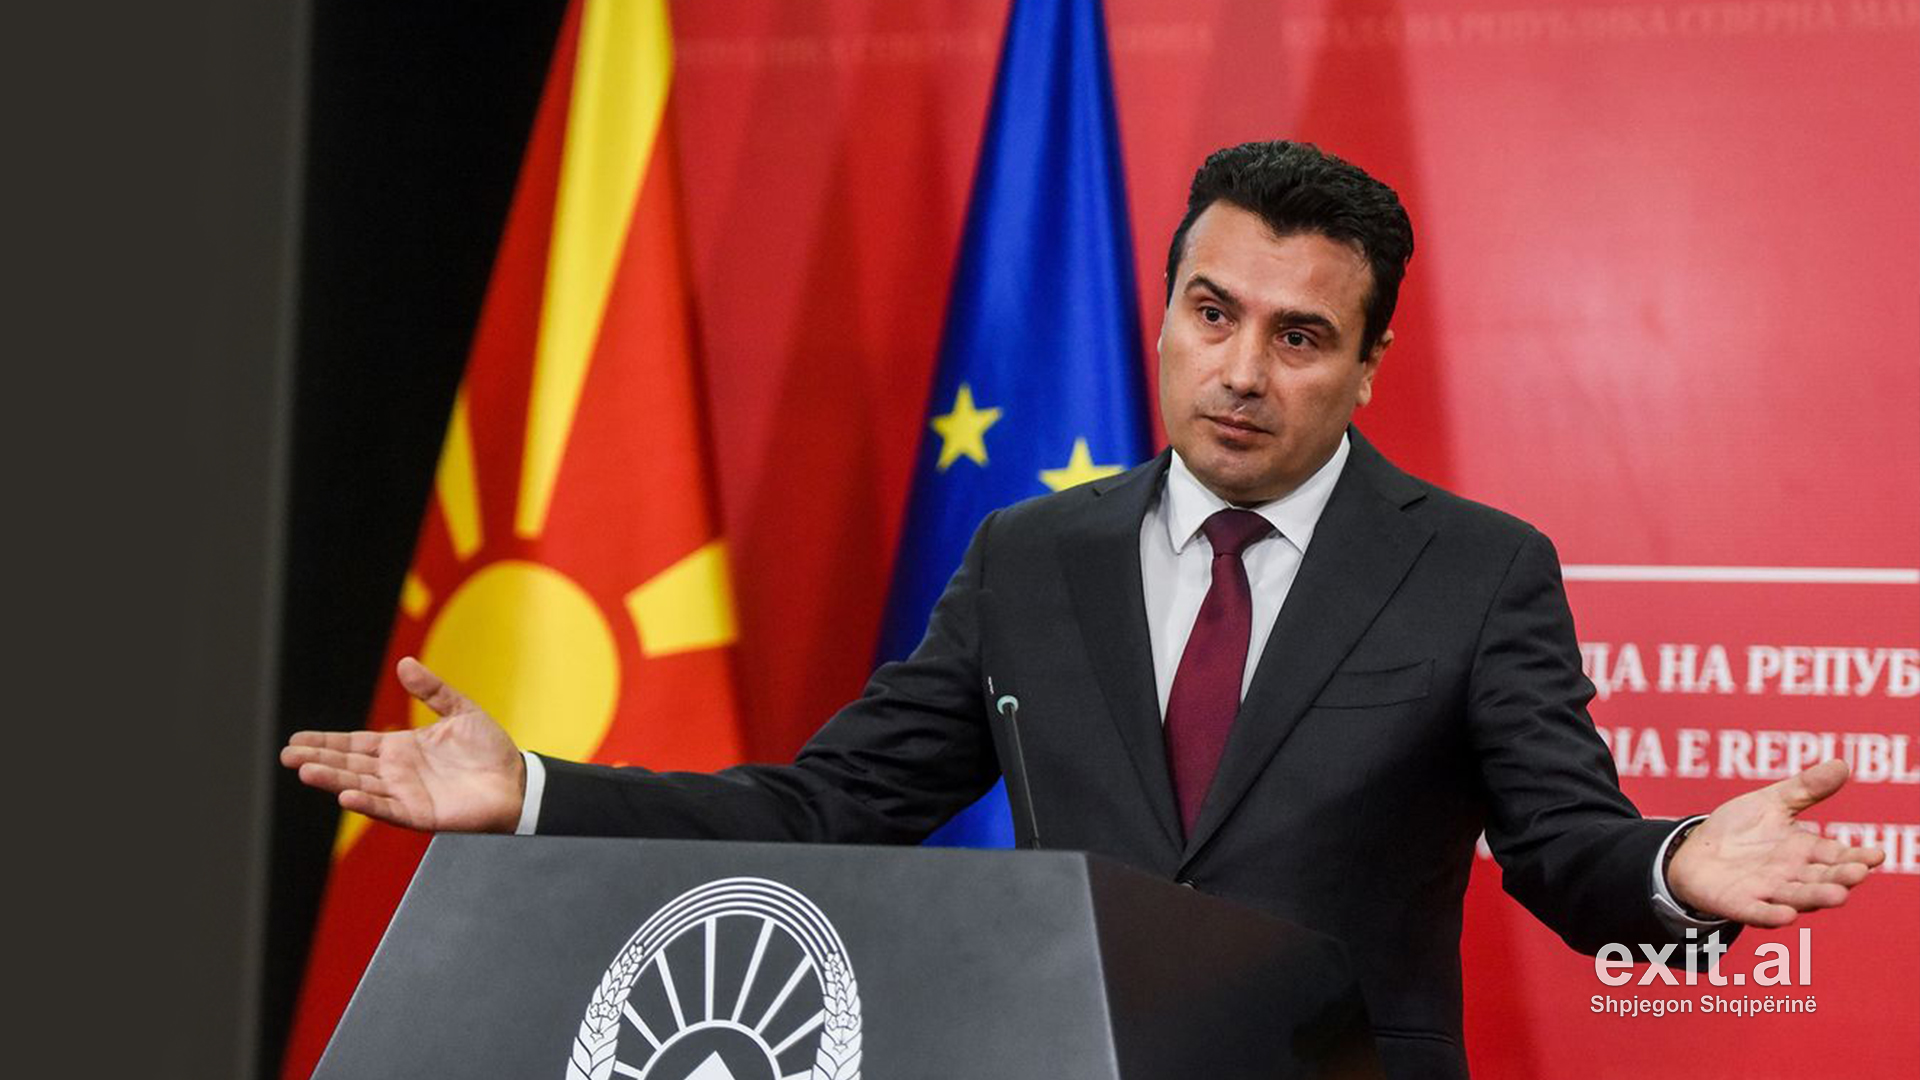 North Macedonia Refuses To Cede To Bulgaria’s Requests Over Start Of EU Talks